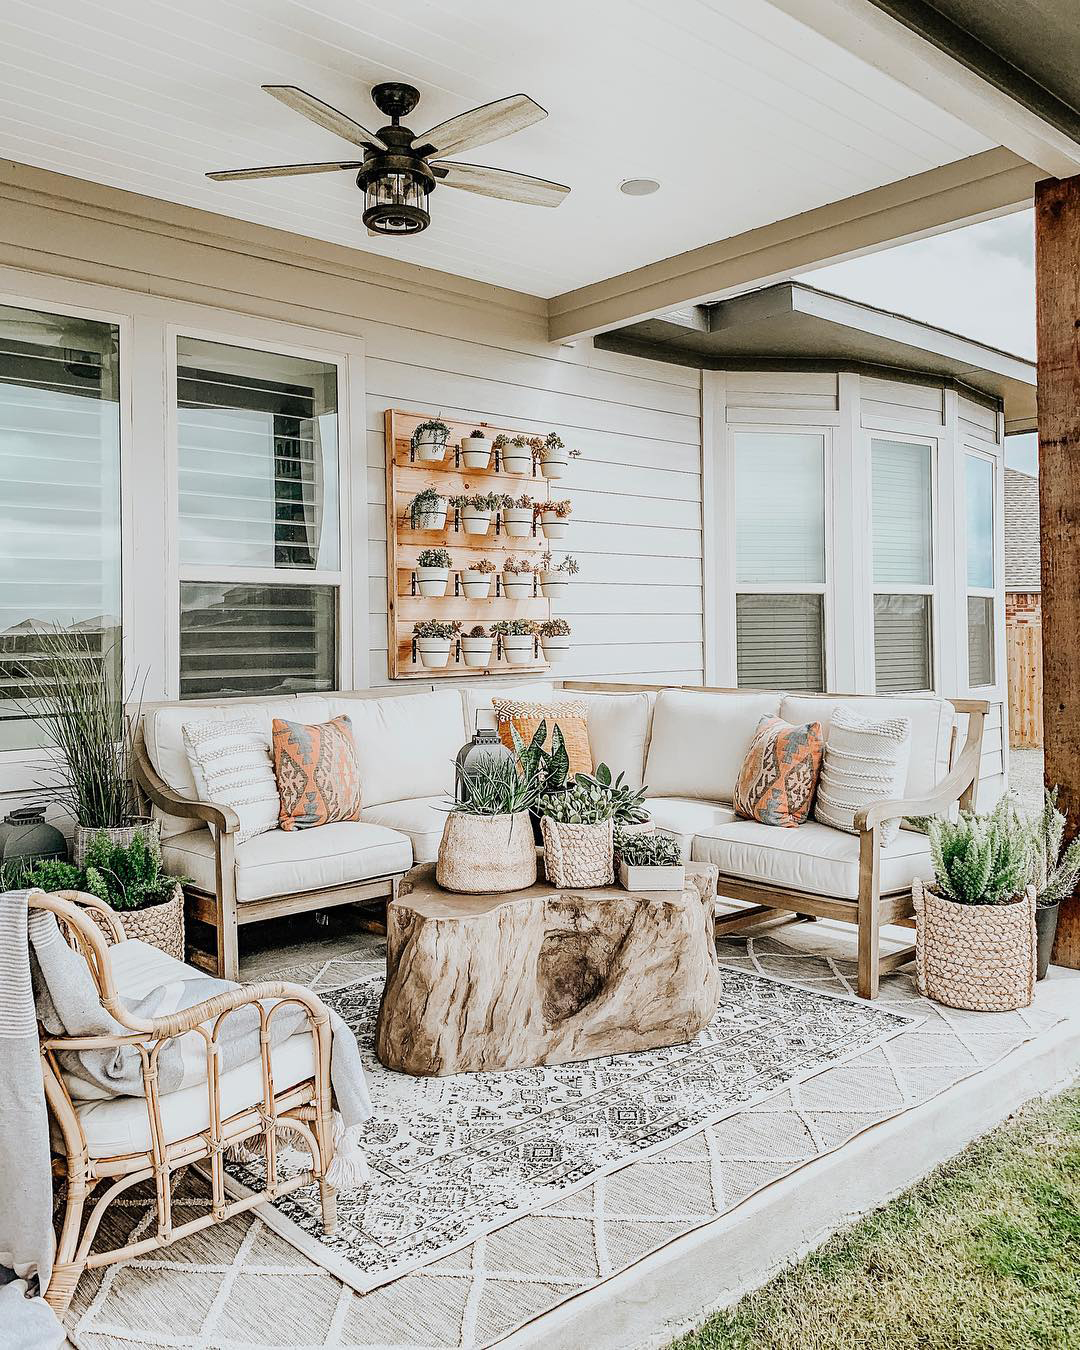 Boho Vibes To Outdoor Living, Outdoor Patio Ceiling Designs For Living Room